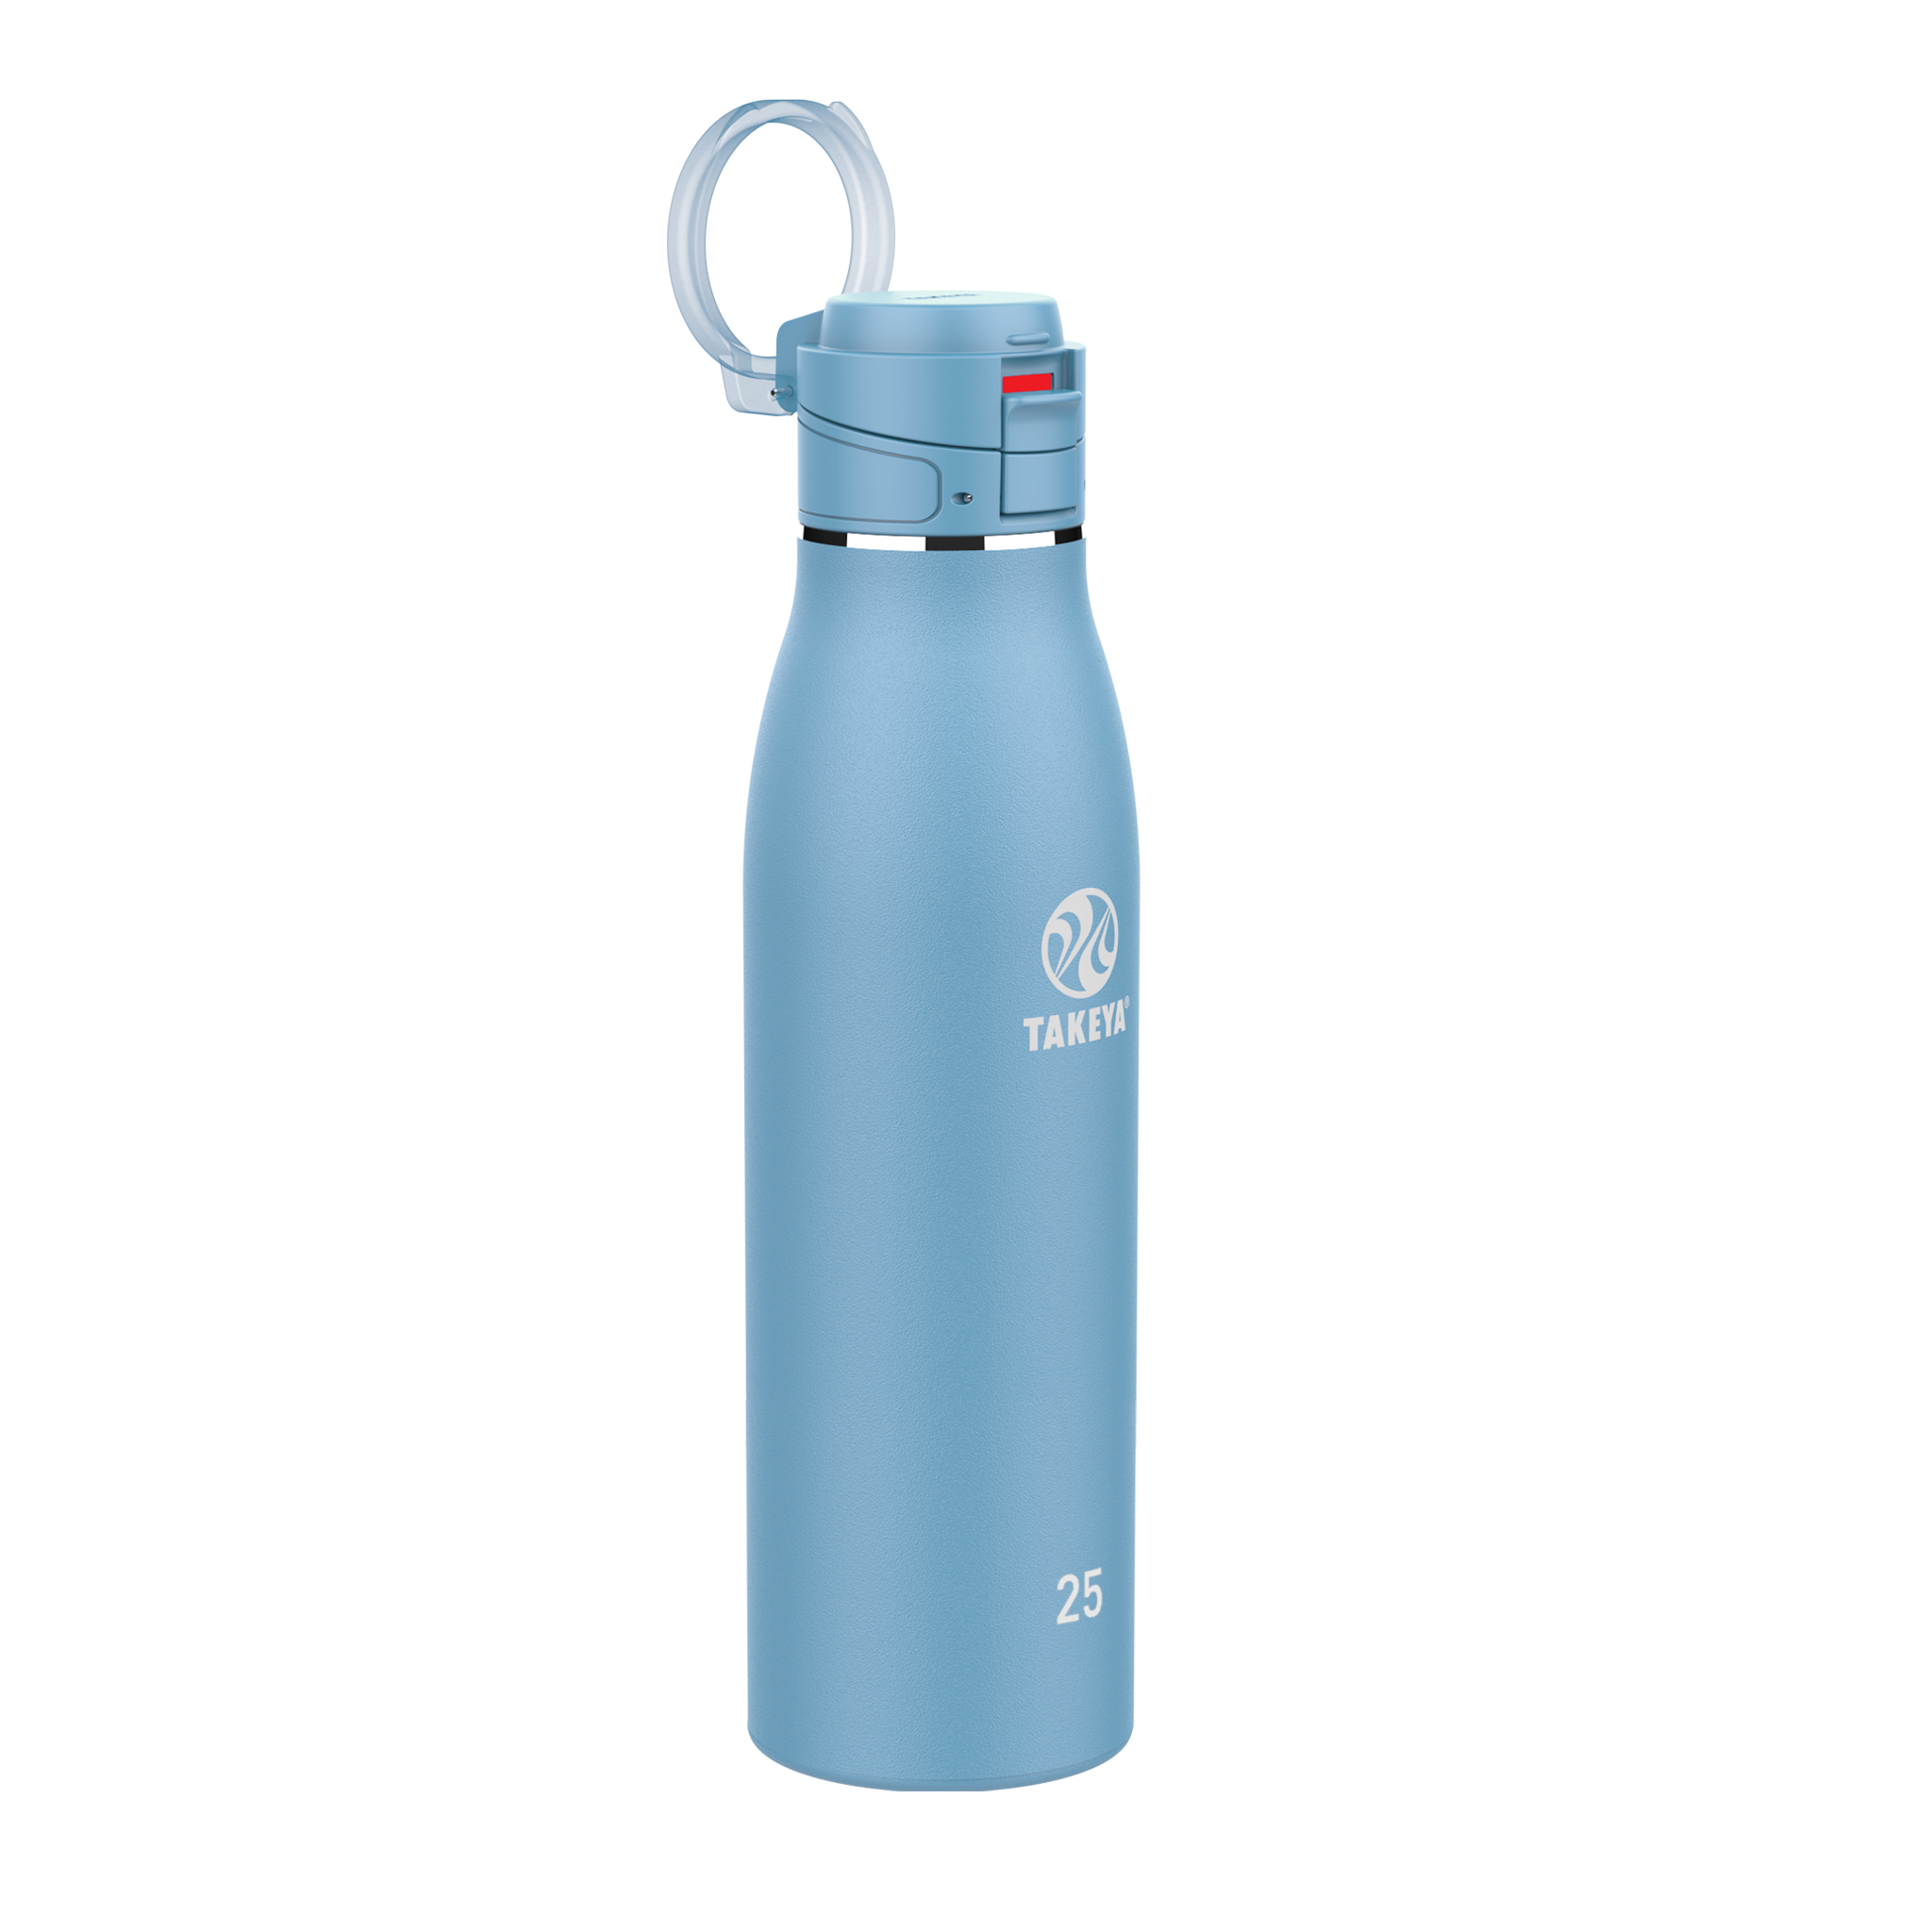 J&V Textiles Insulated Stainless Steel Water Bottle J&V Textiles Size: 25 oz